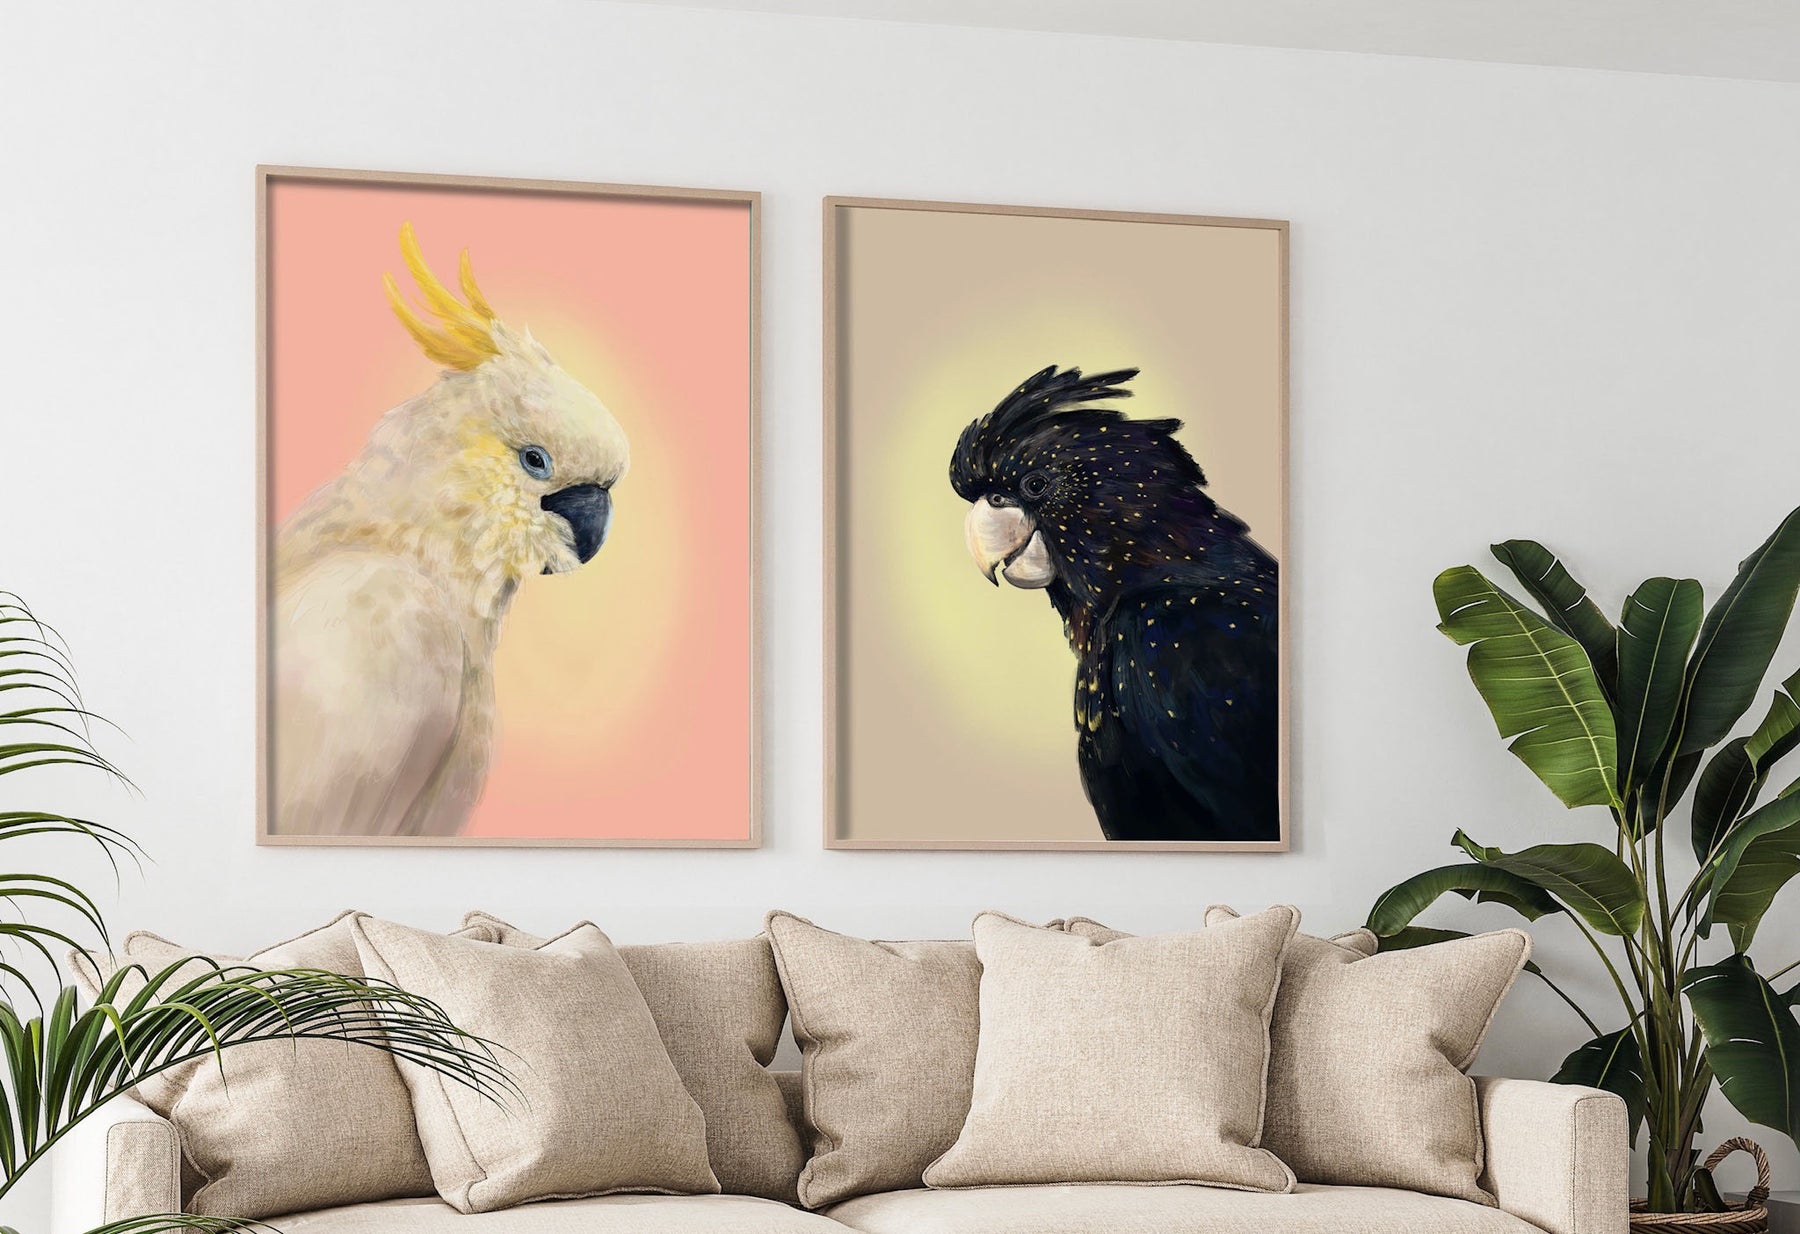 New Wall Art - CockaTwos